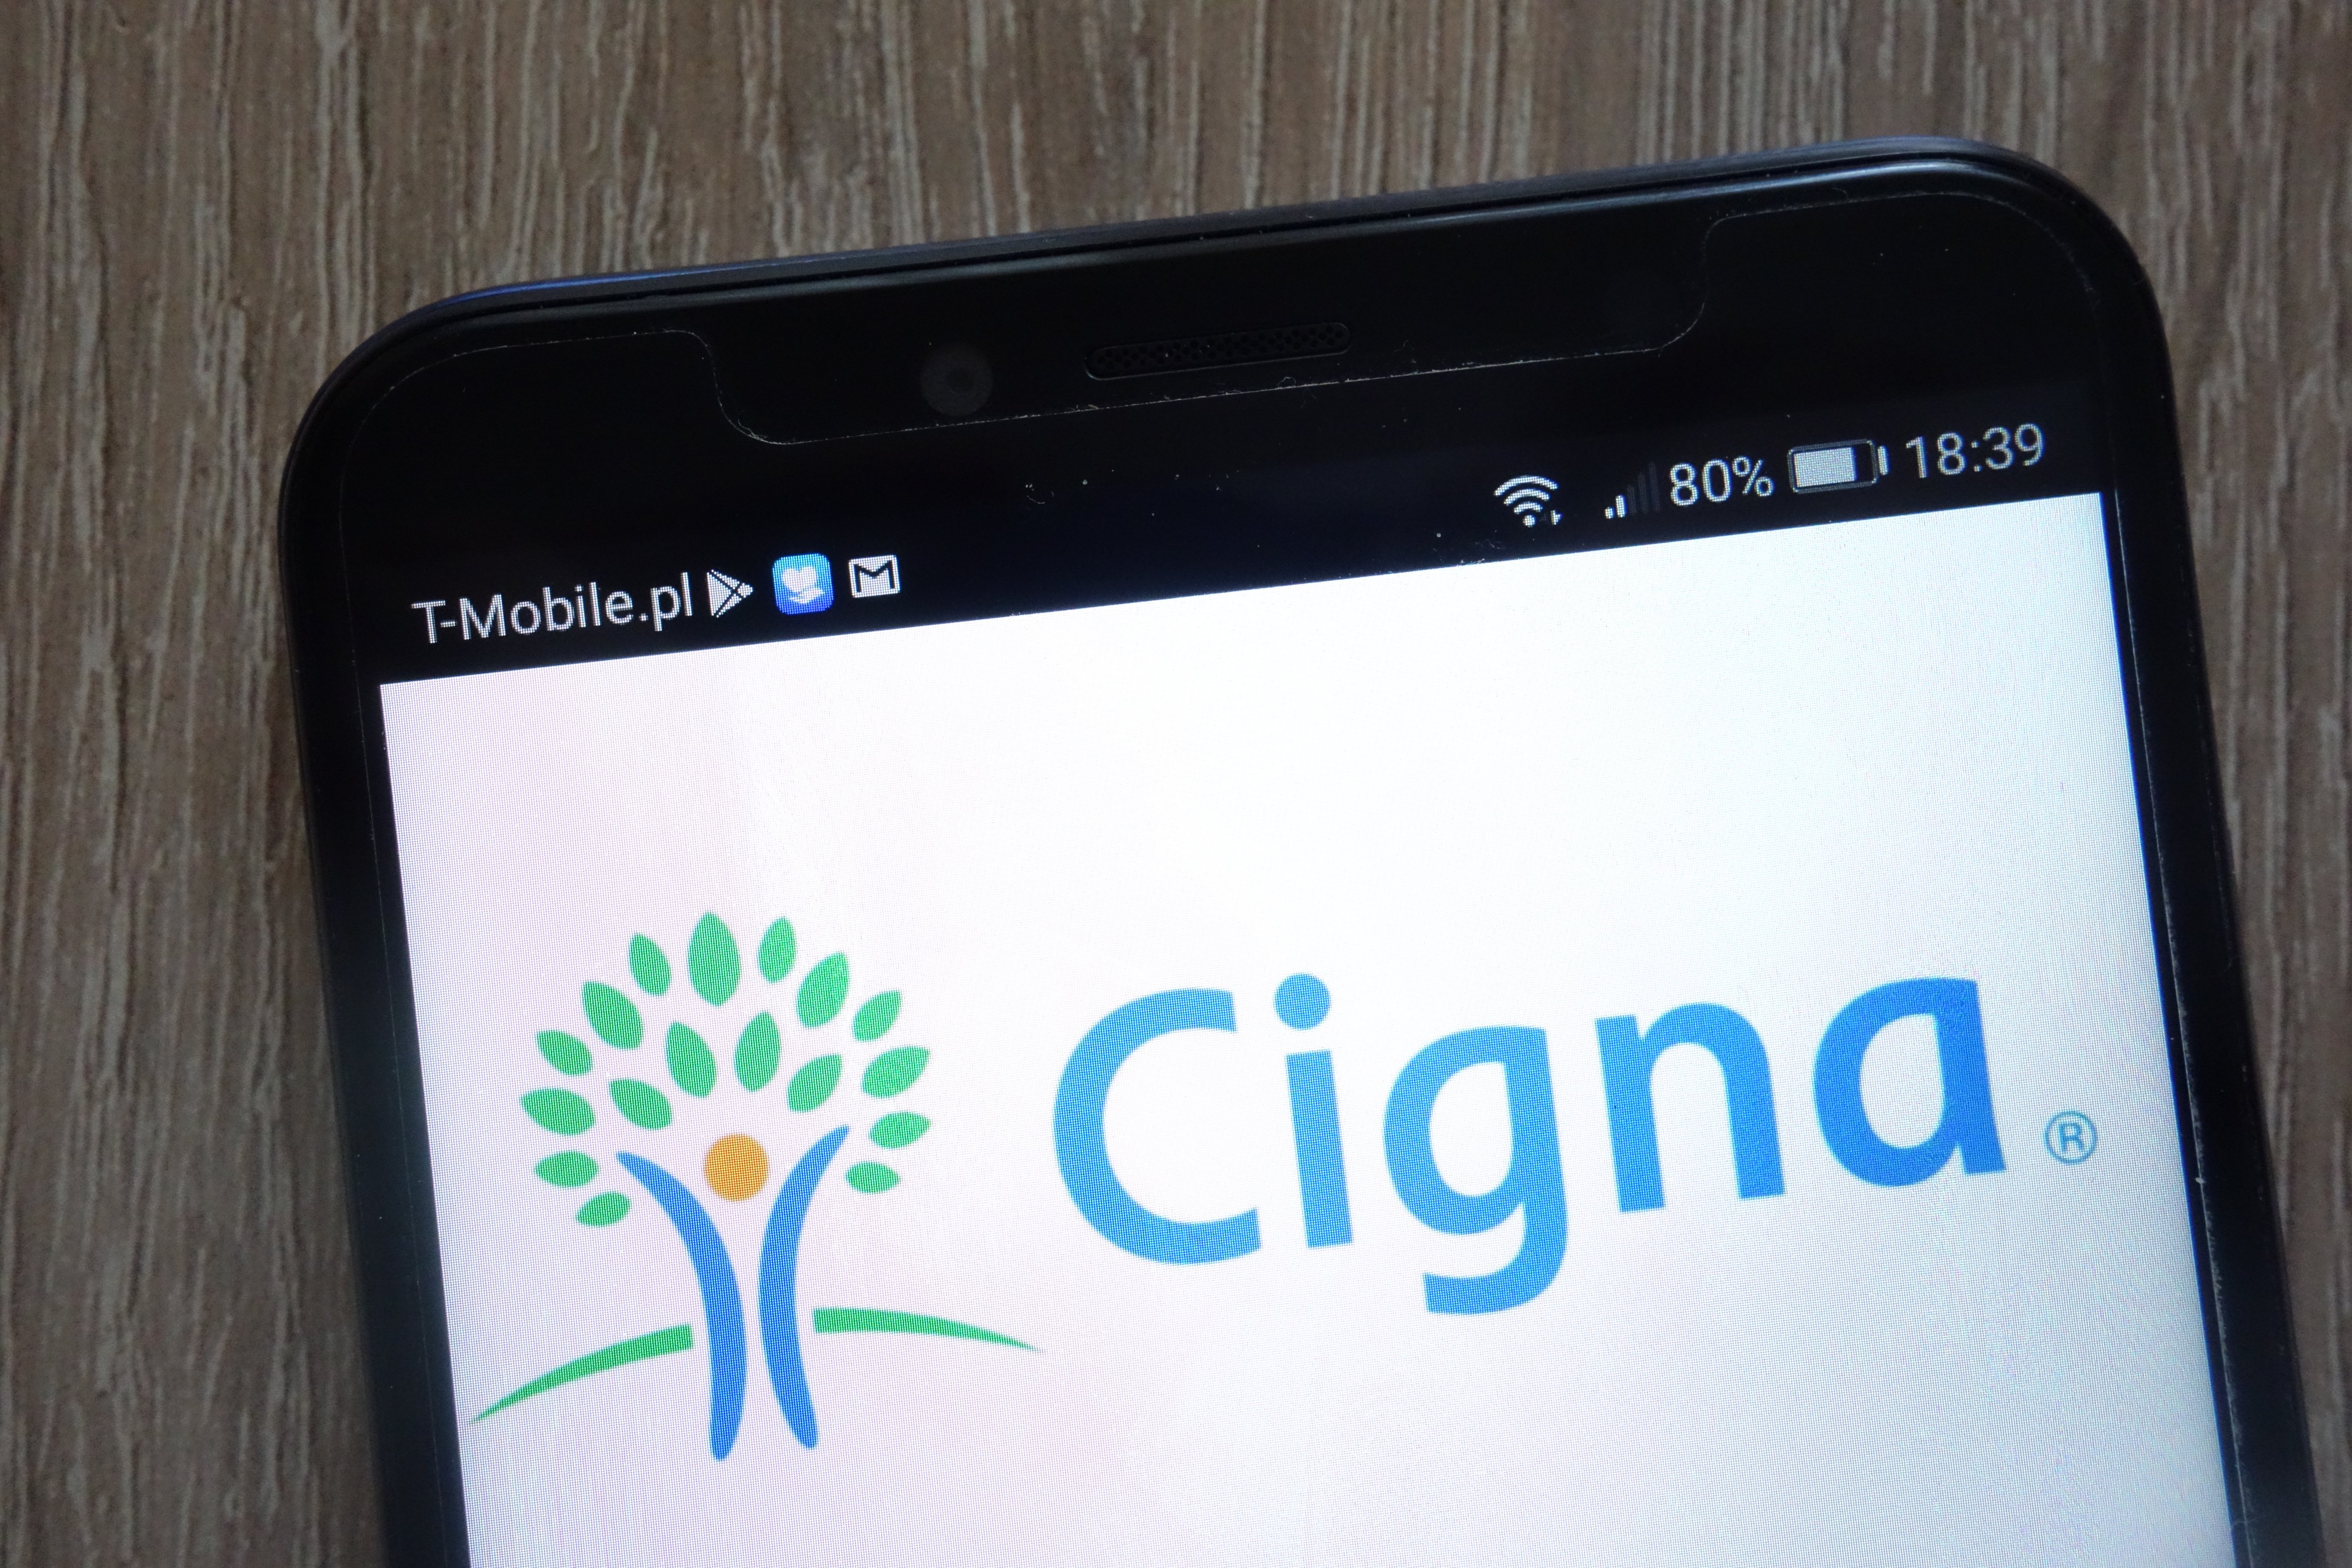 Cigna phone number providers key forces that changed healthcare information technology industry